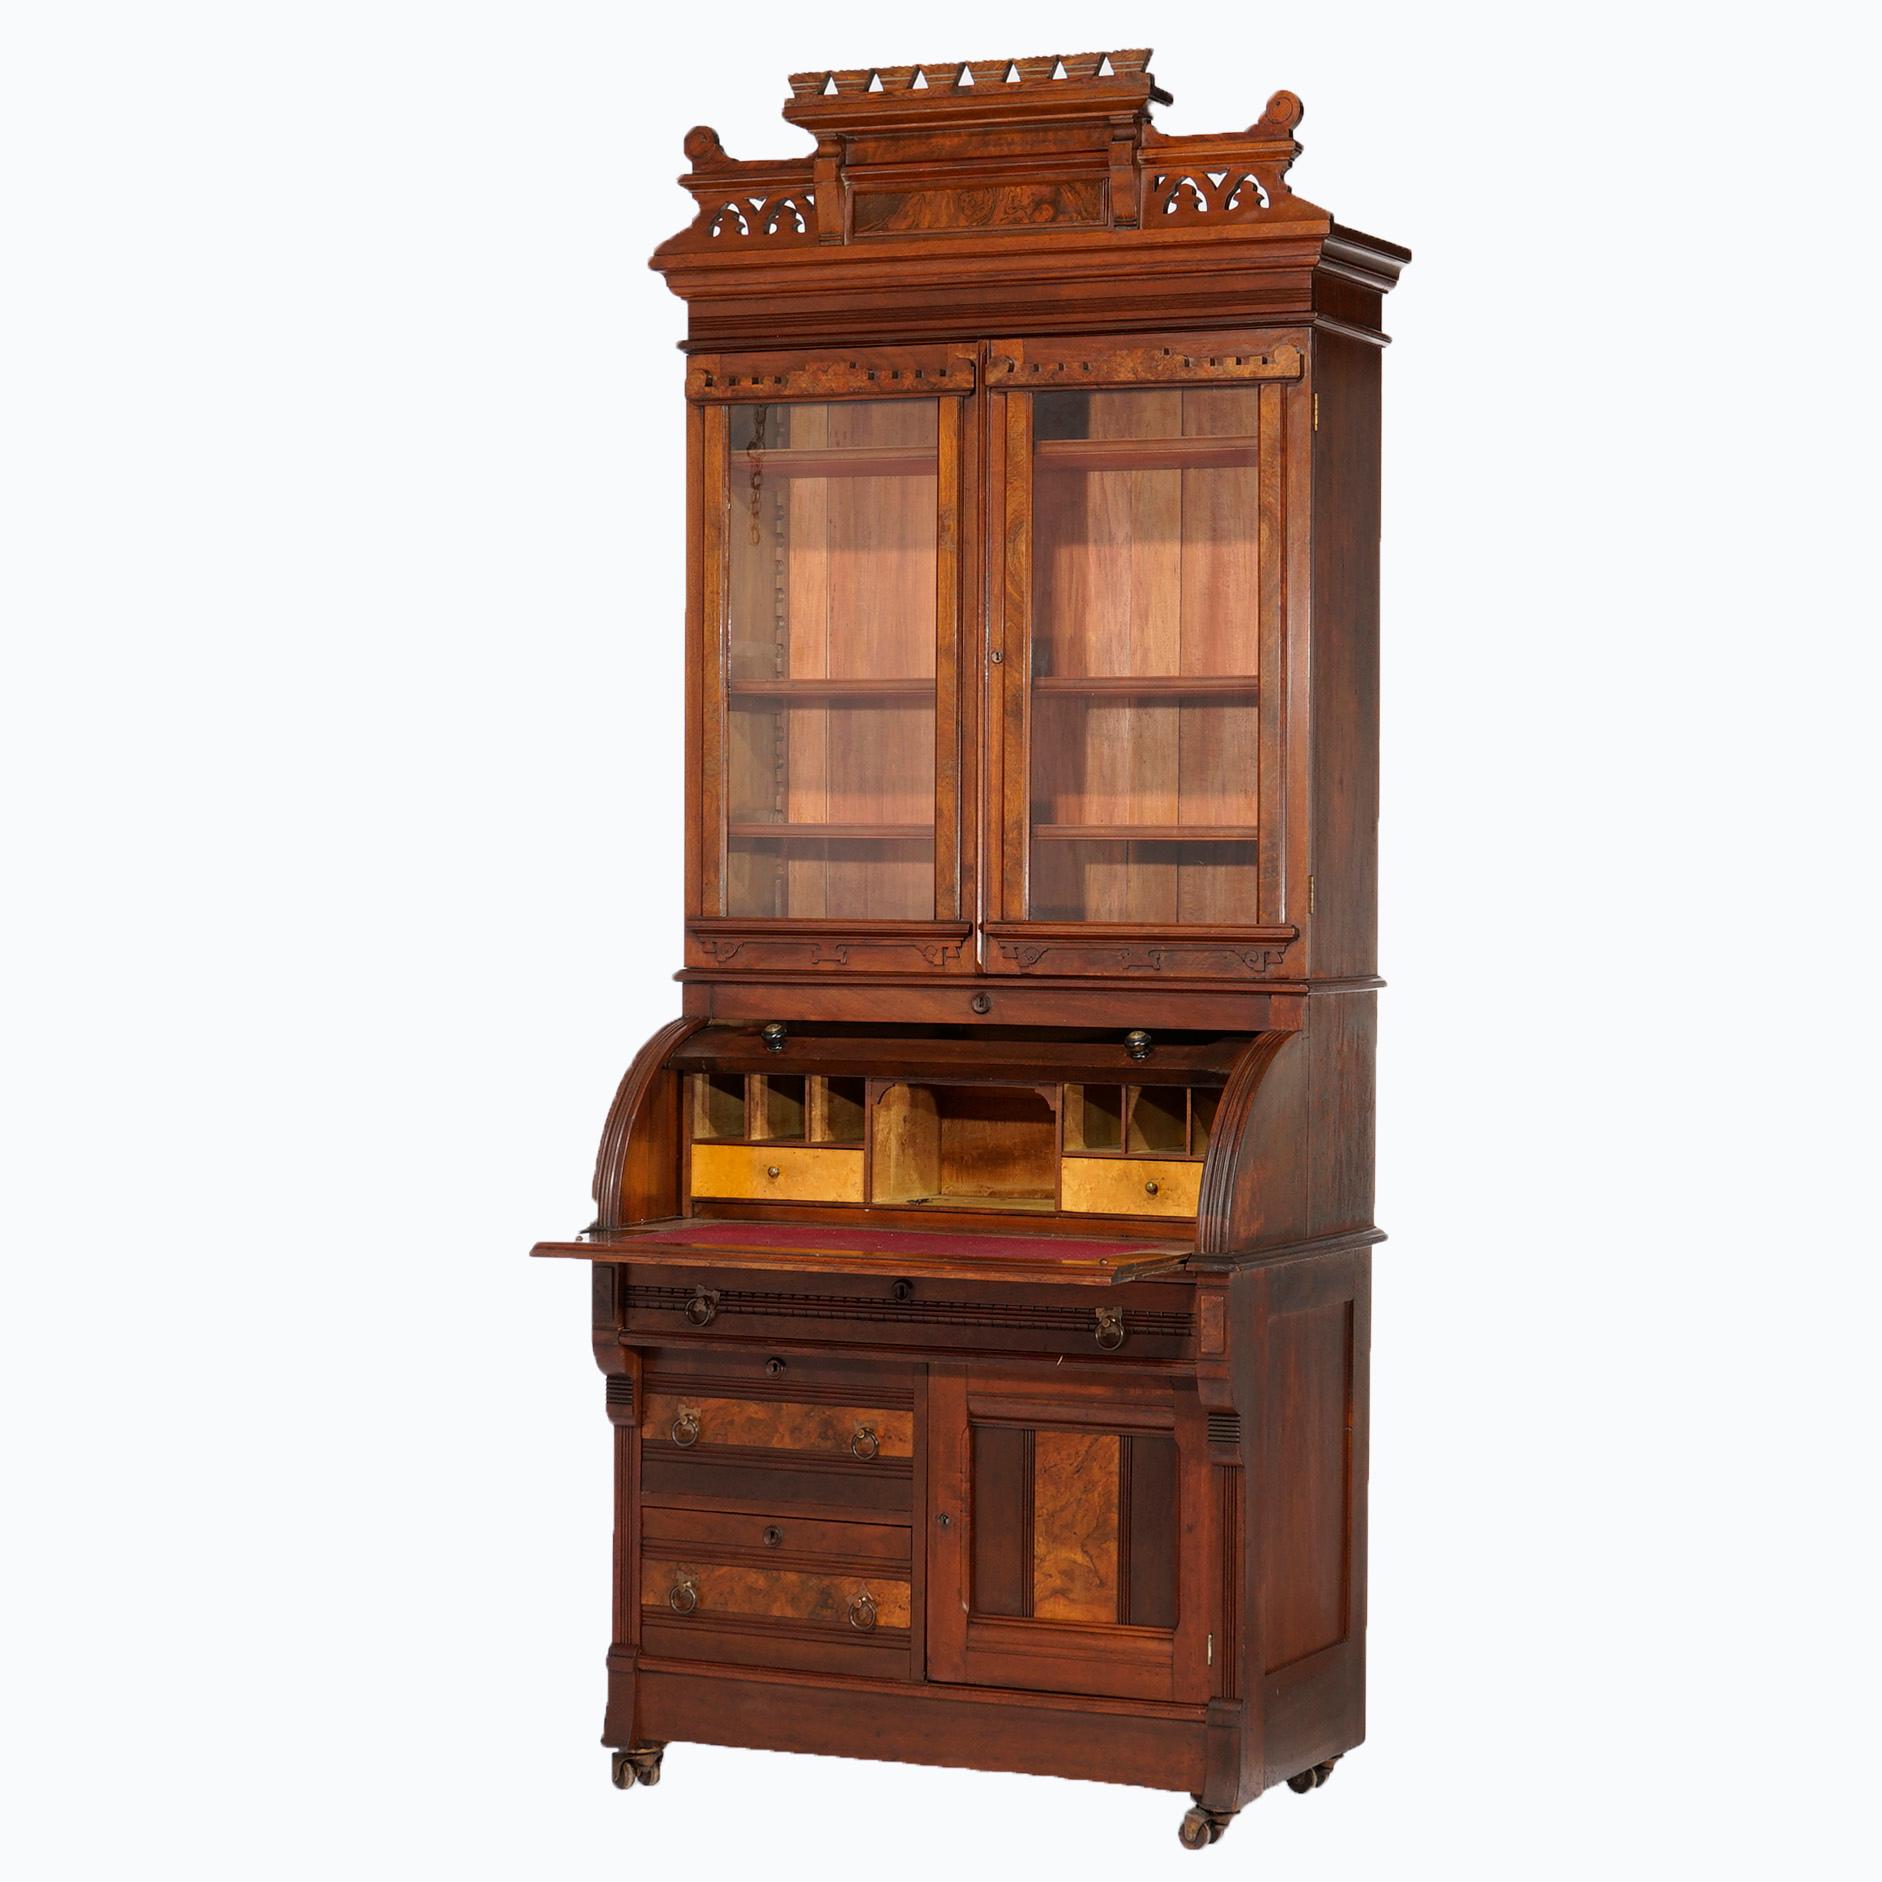 An antique Eastlake secretary offers walnut and burl construction with pierced crest over double glass door bookcase with double glass doors opening to shelved interior over lower with barrel roll desk over drawers and lower cabinet,